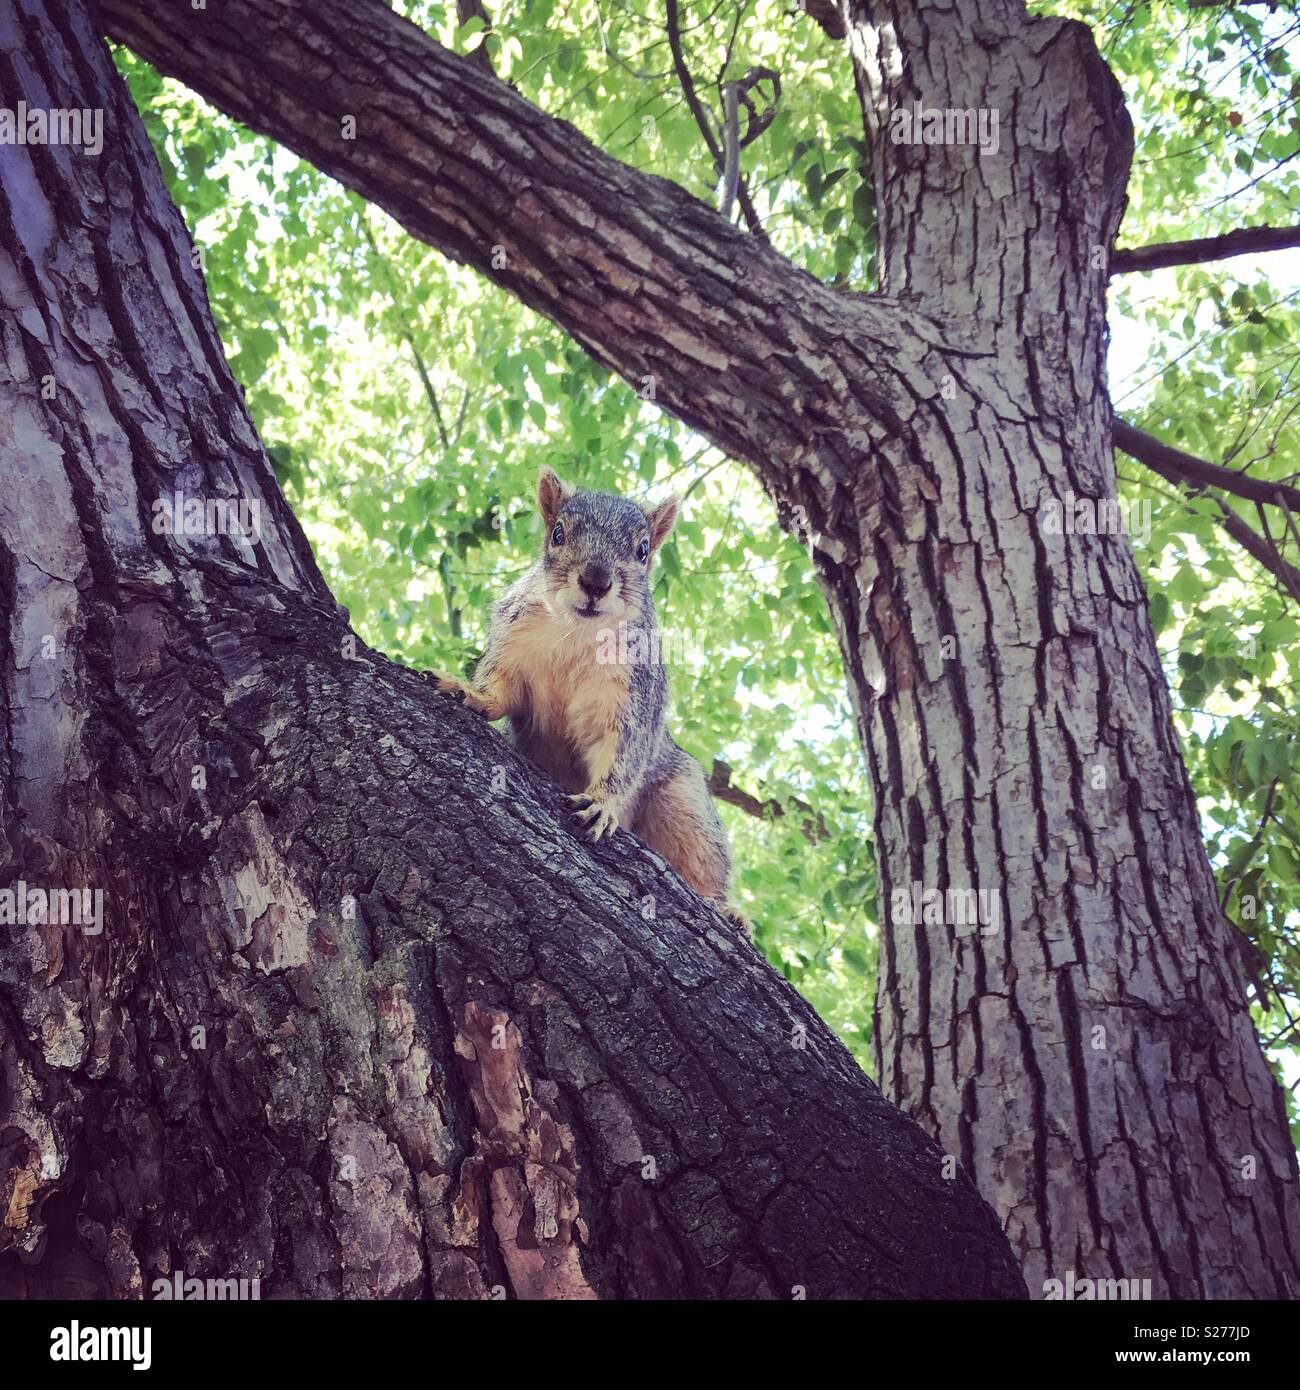 A squirrel in a tree. Stock Photo